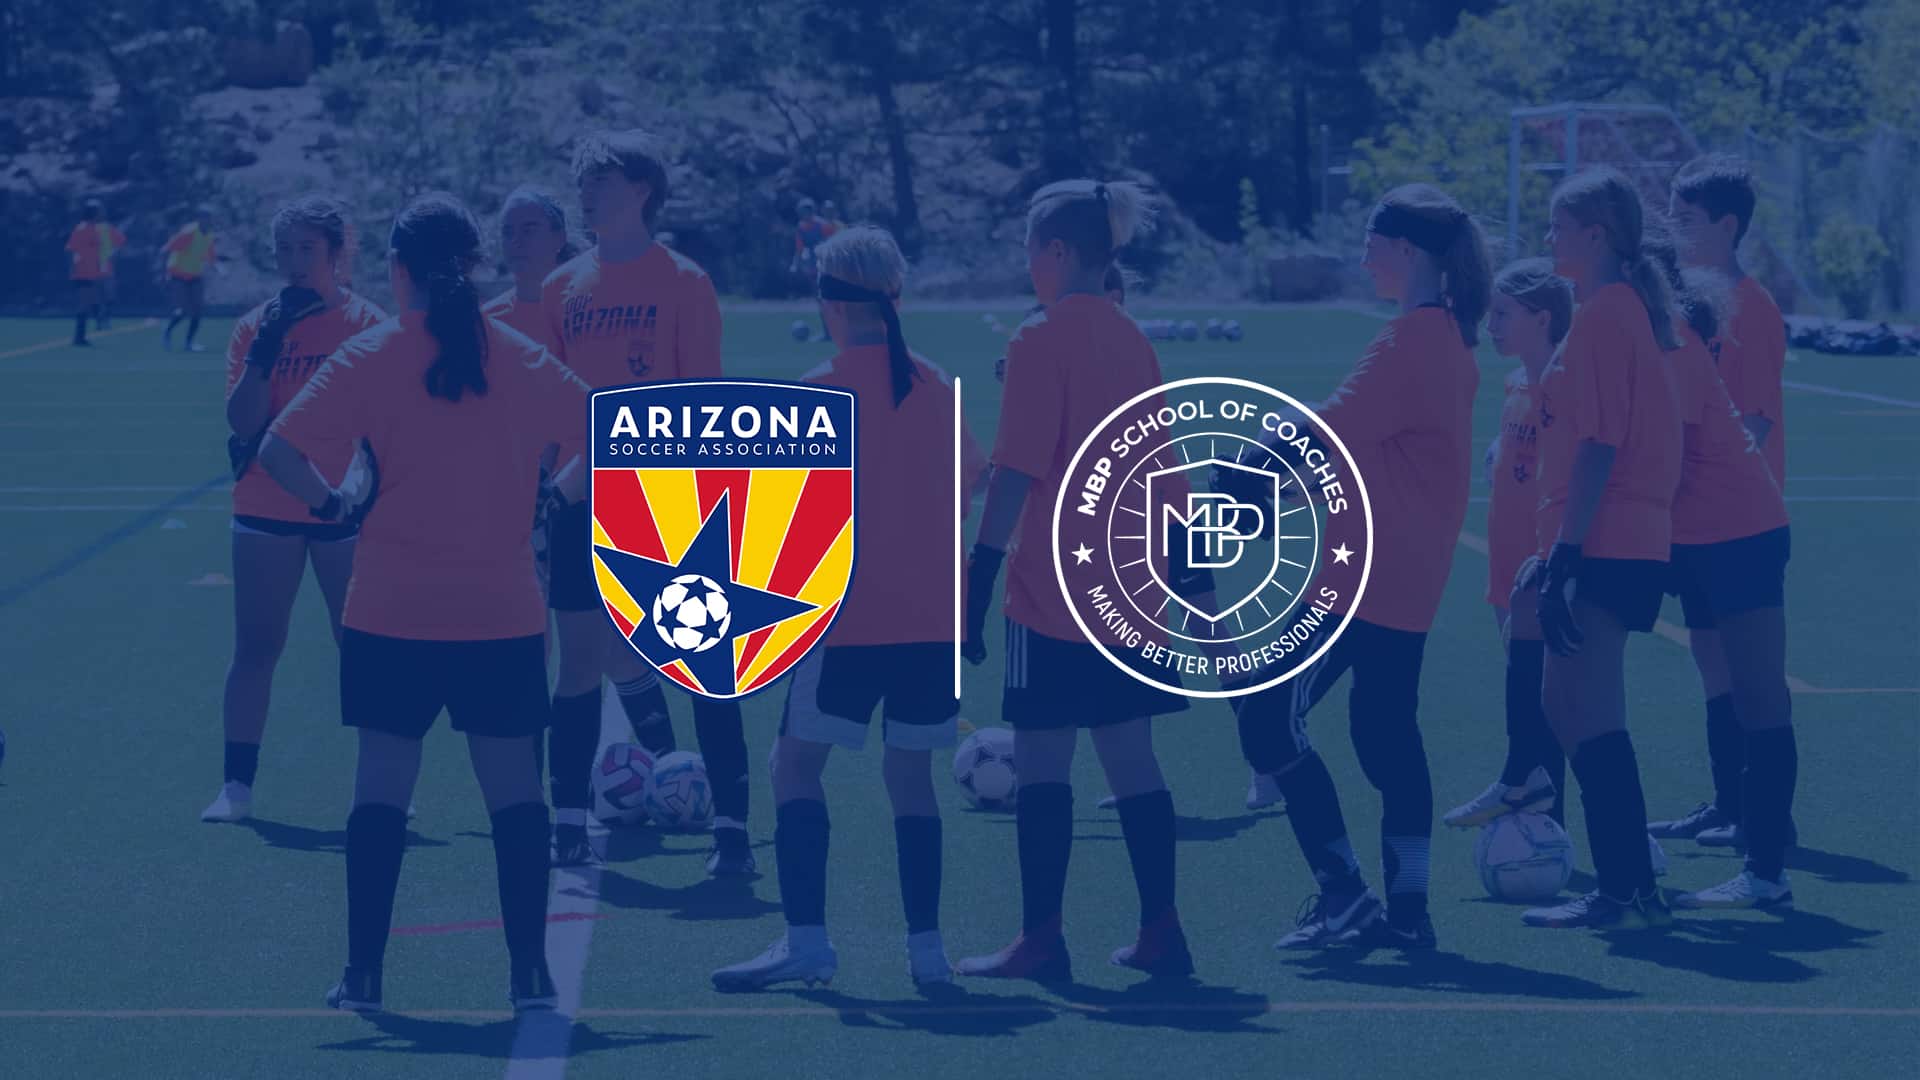 You are currently viewing MBP and the Arizona Soccer Association announce partnership